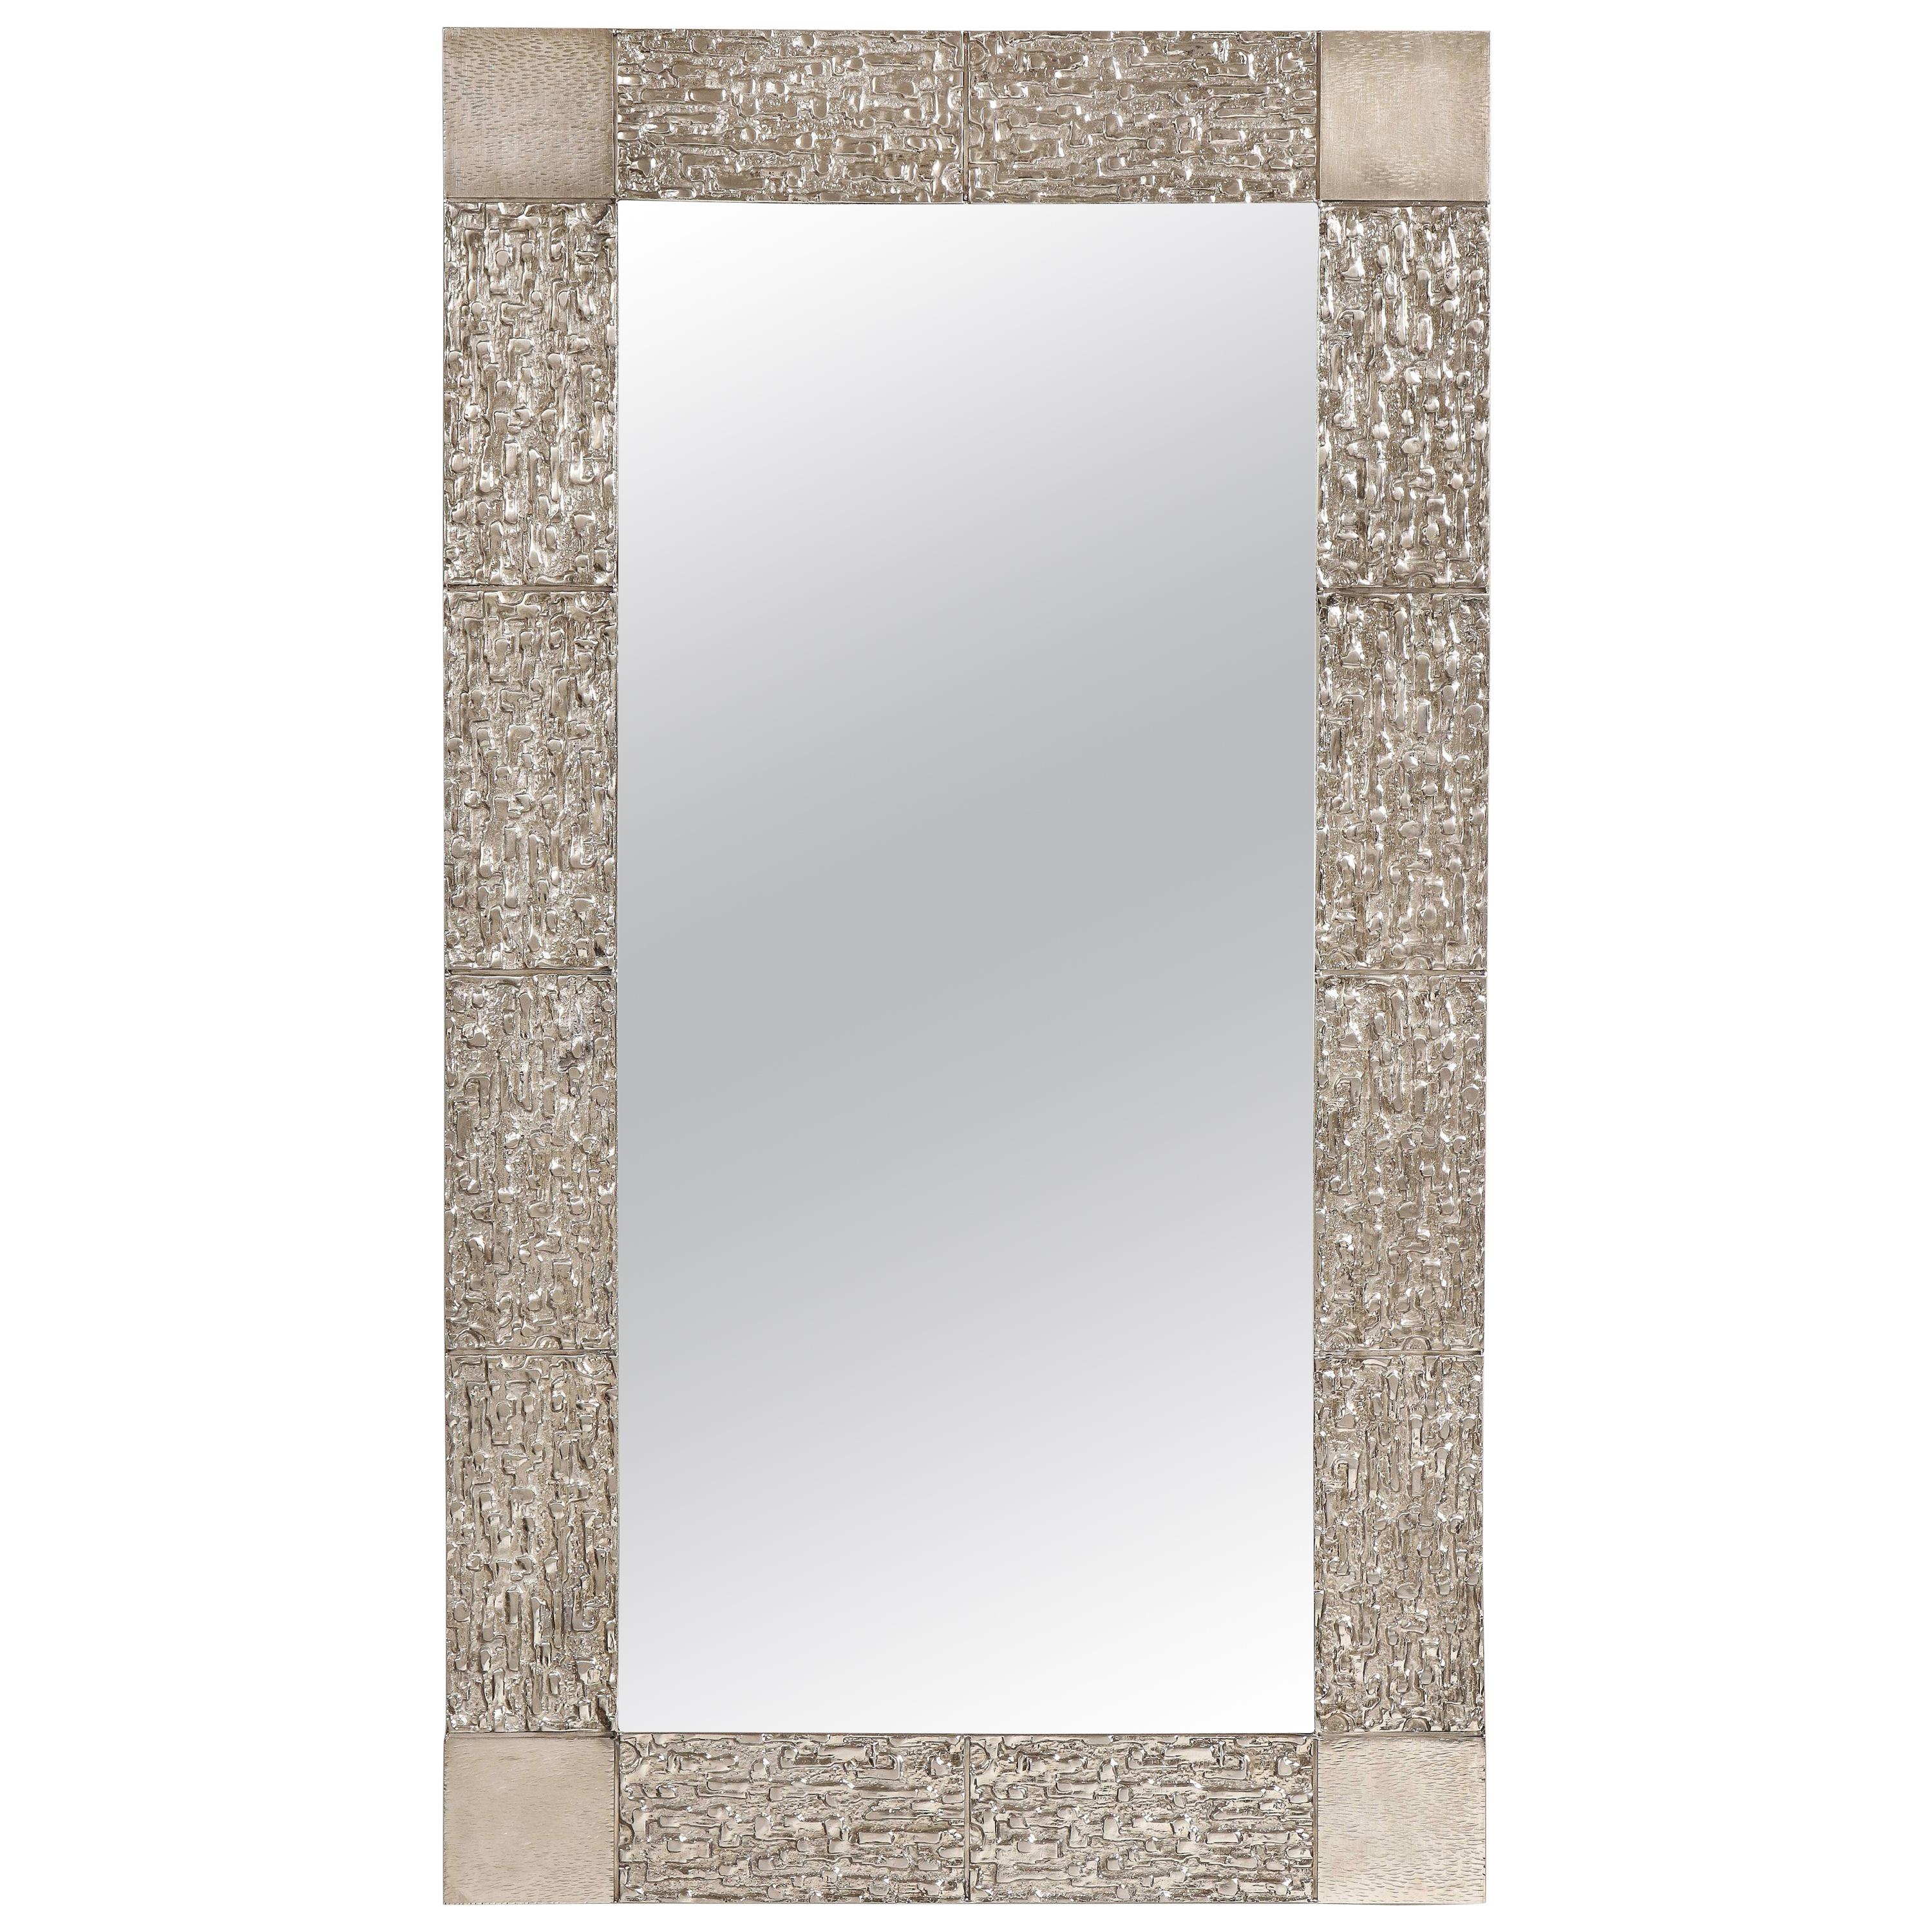 Custom Brutalist Mirror in the Style of Luciano Frigerio in Brushed Nickel